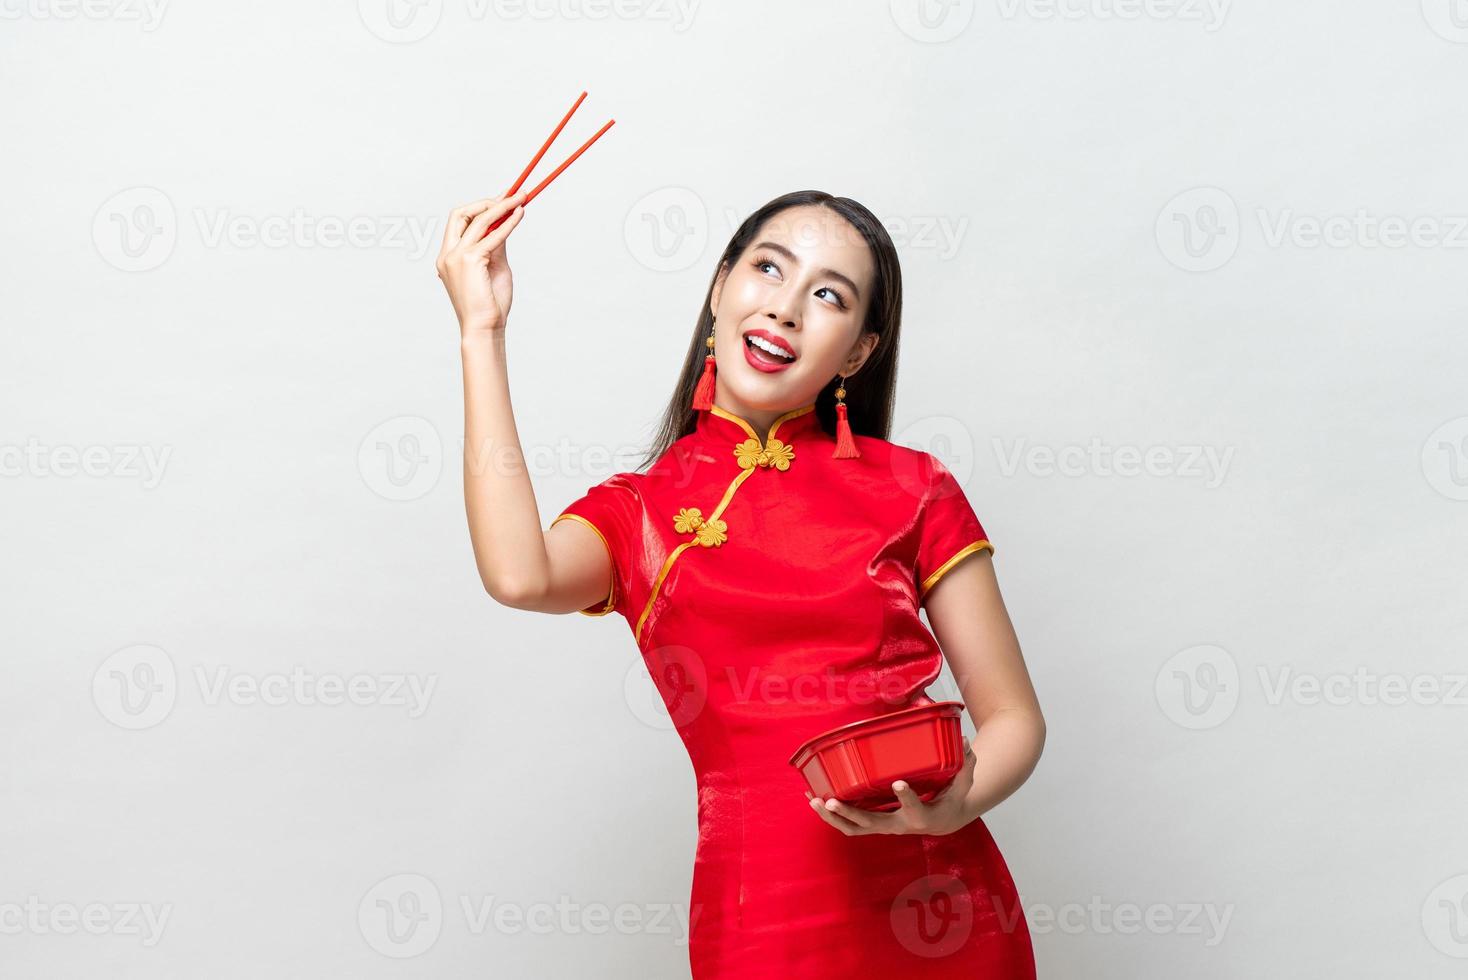 Cheerful Asian female in traditional red dress raising arm with chopsticks and looking up with smile against gray background photo